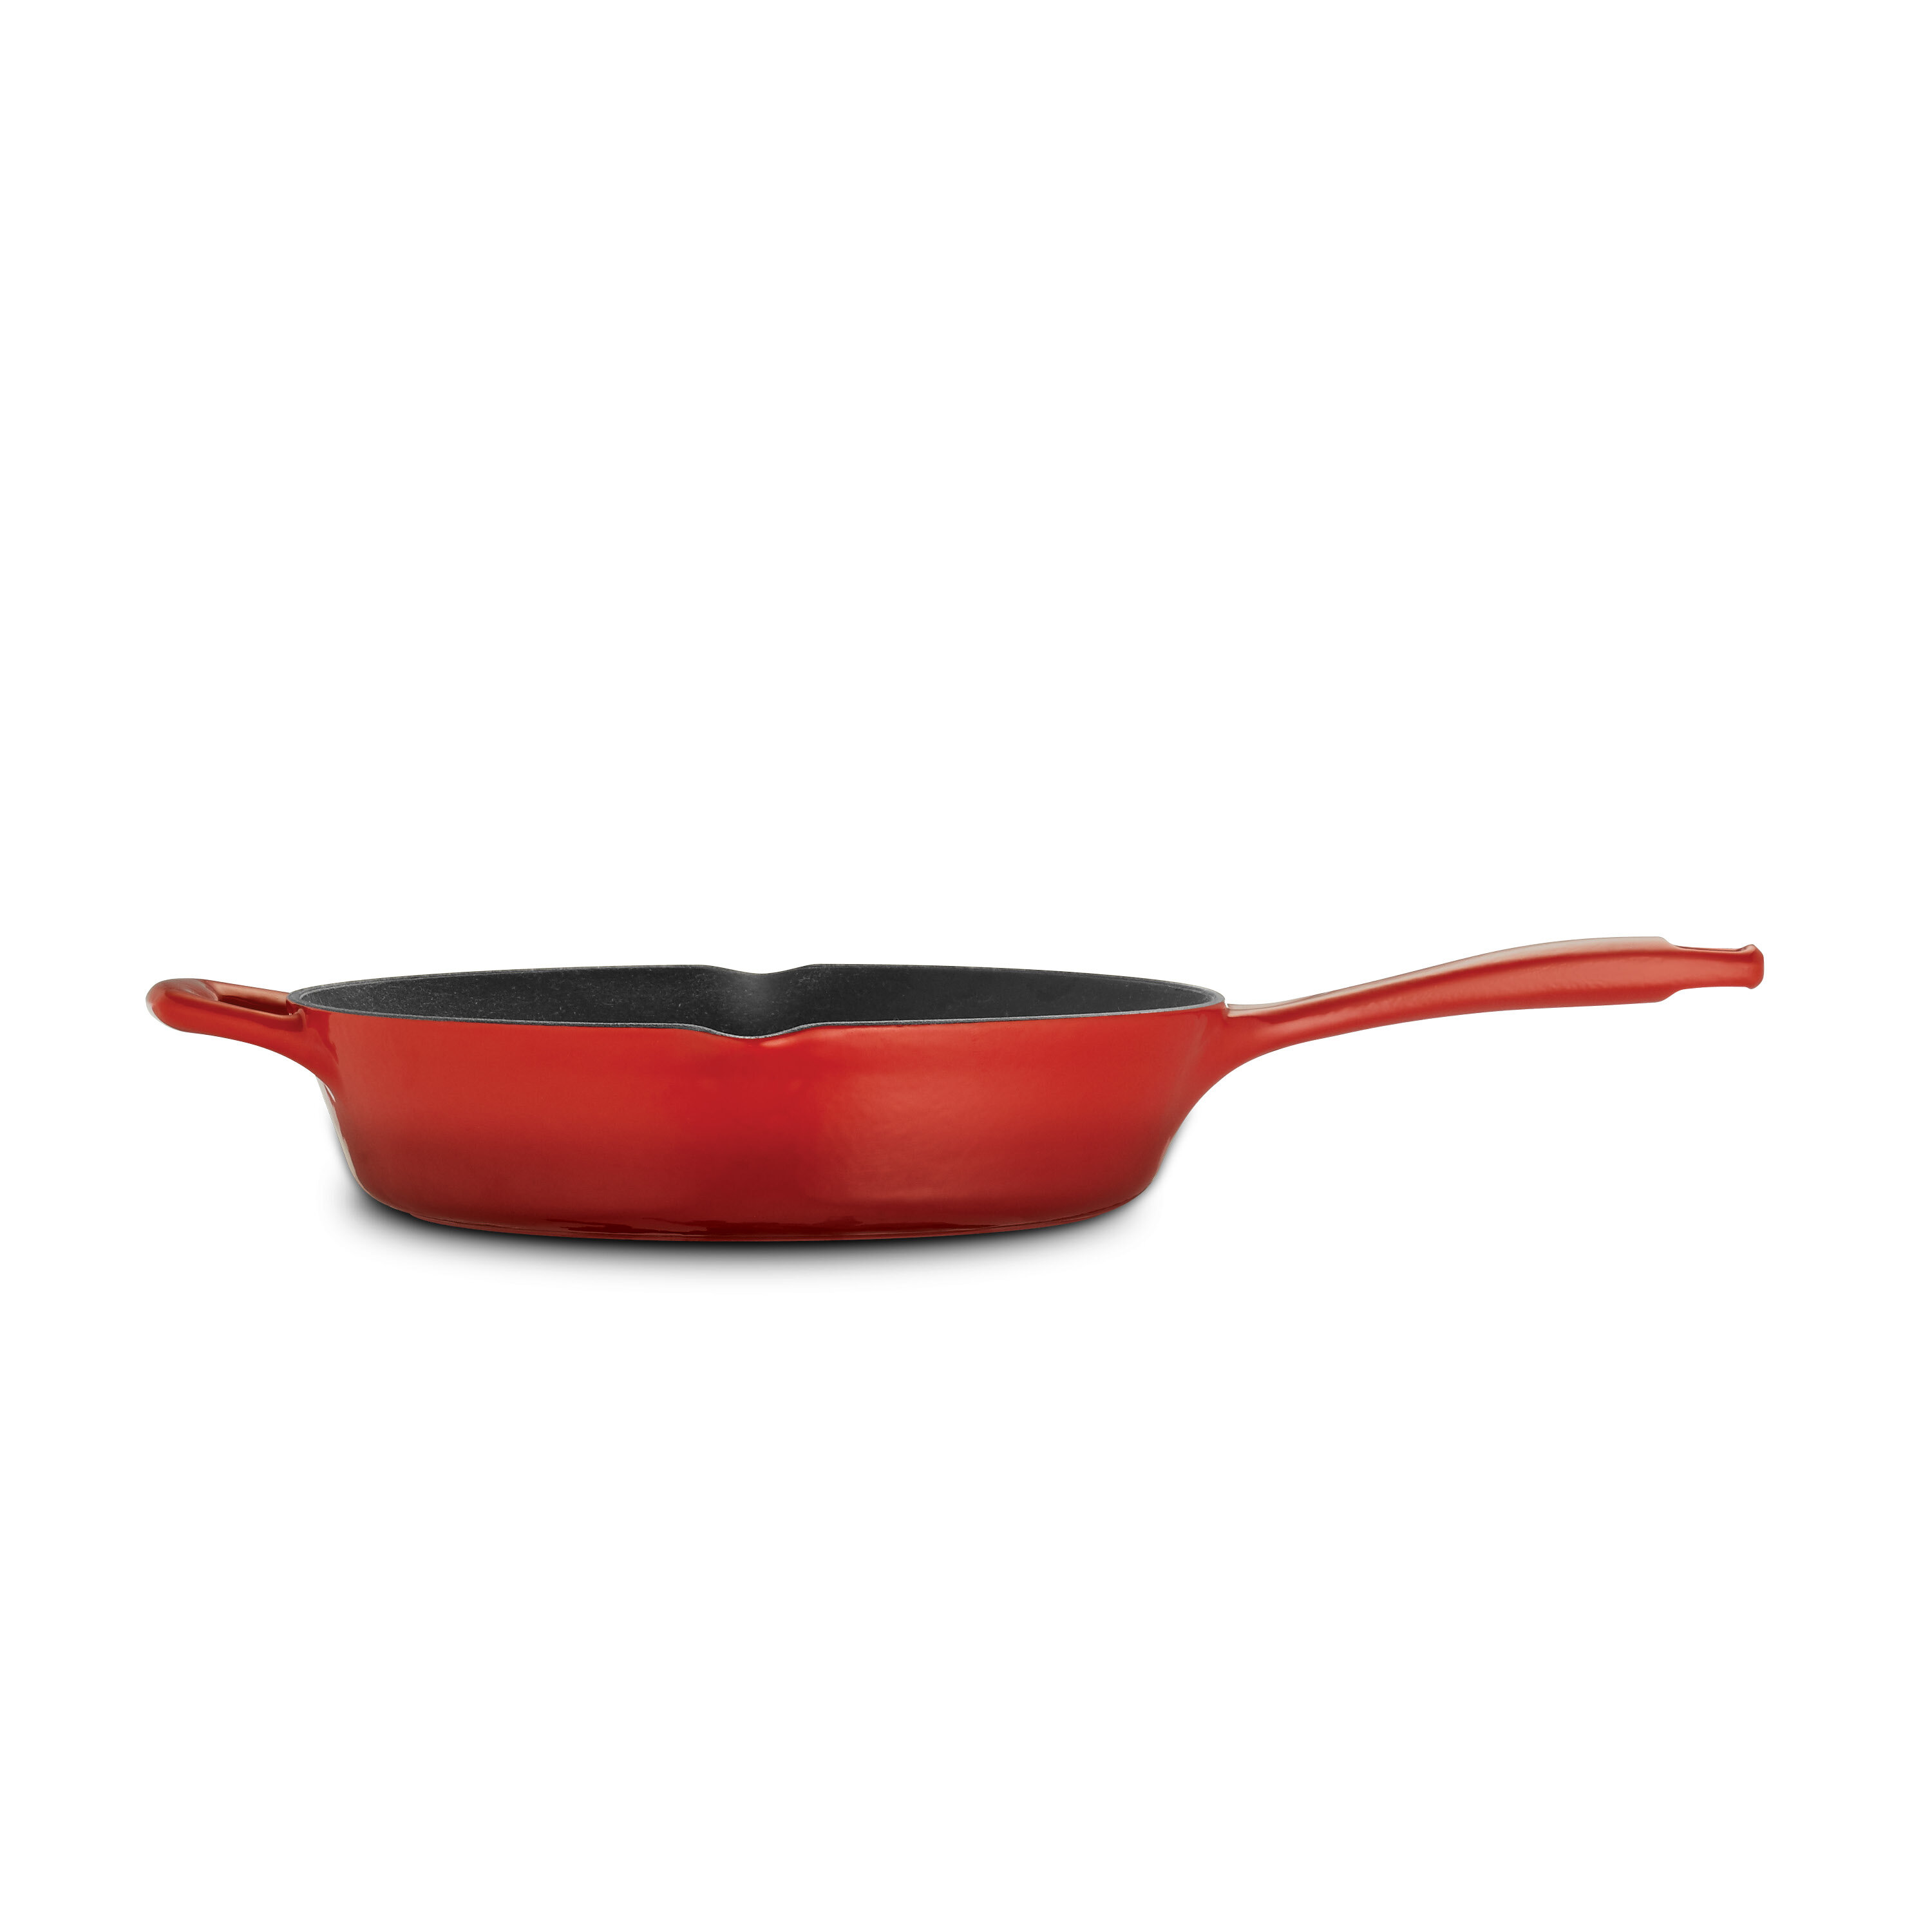 Tramontina Gourmet Enameled Cast Iron Skillet - Gradated Red - 12 in.